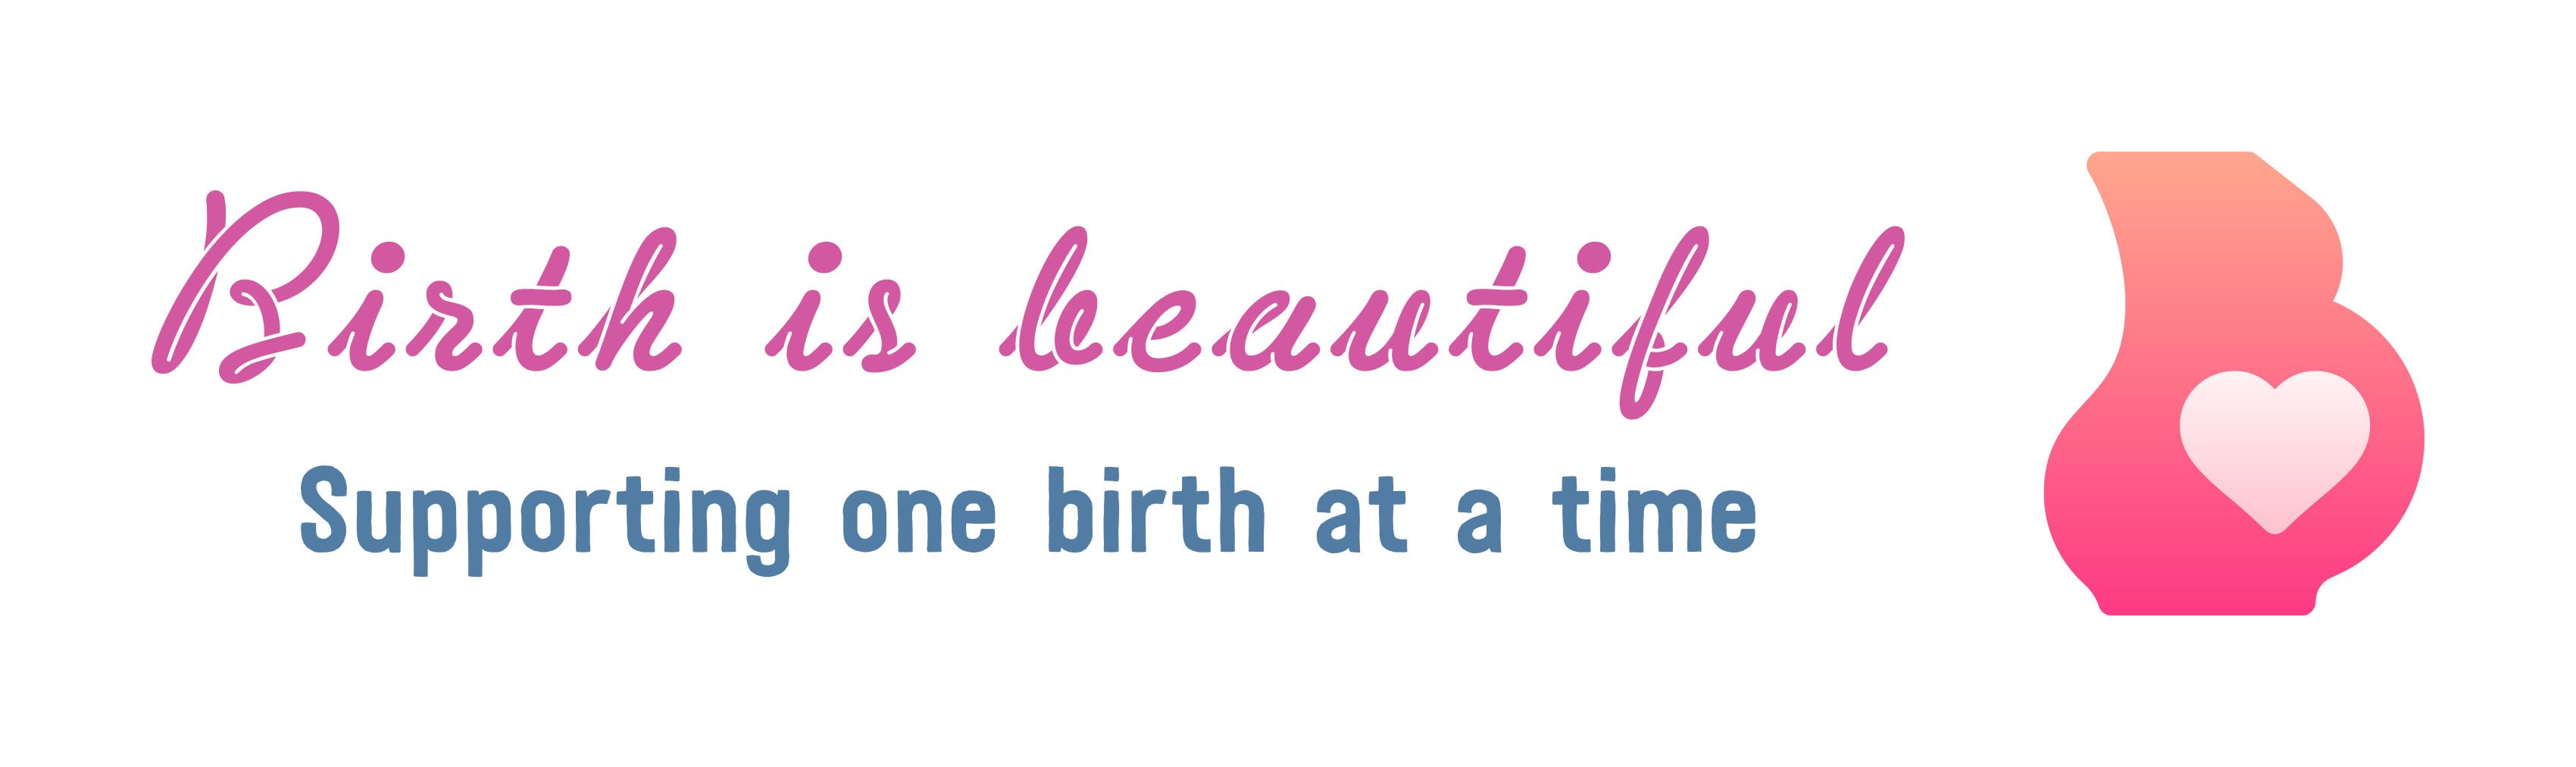 Birth Is Beautiful Doula Services LLC